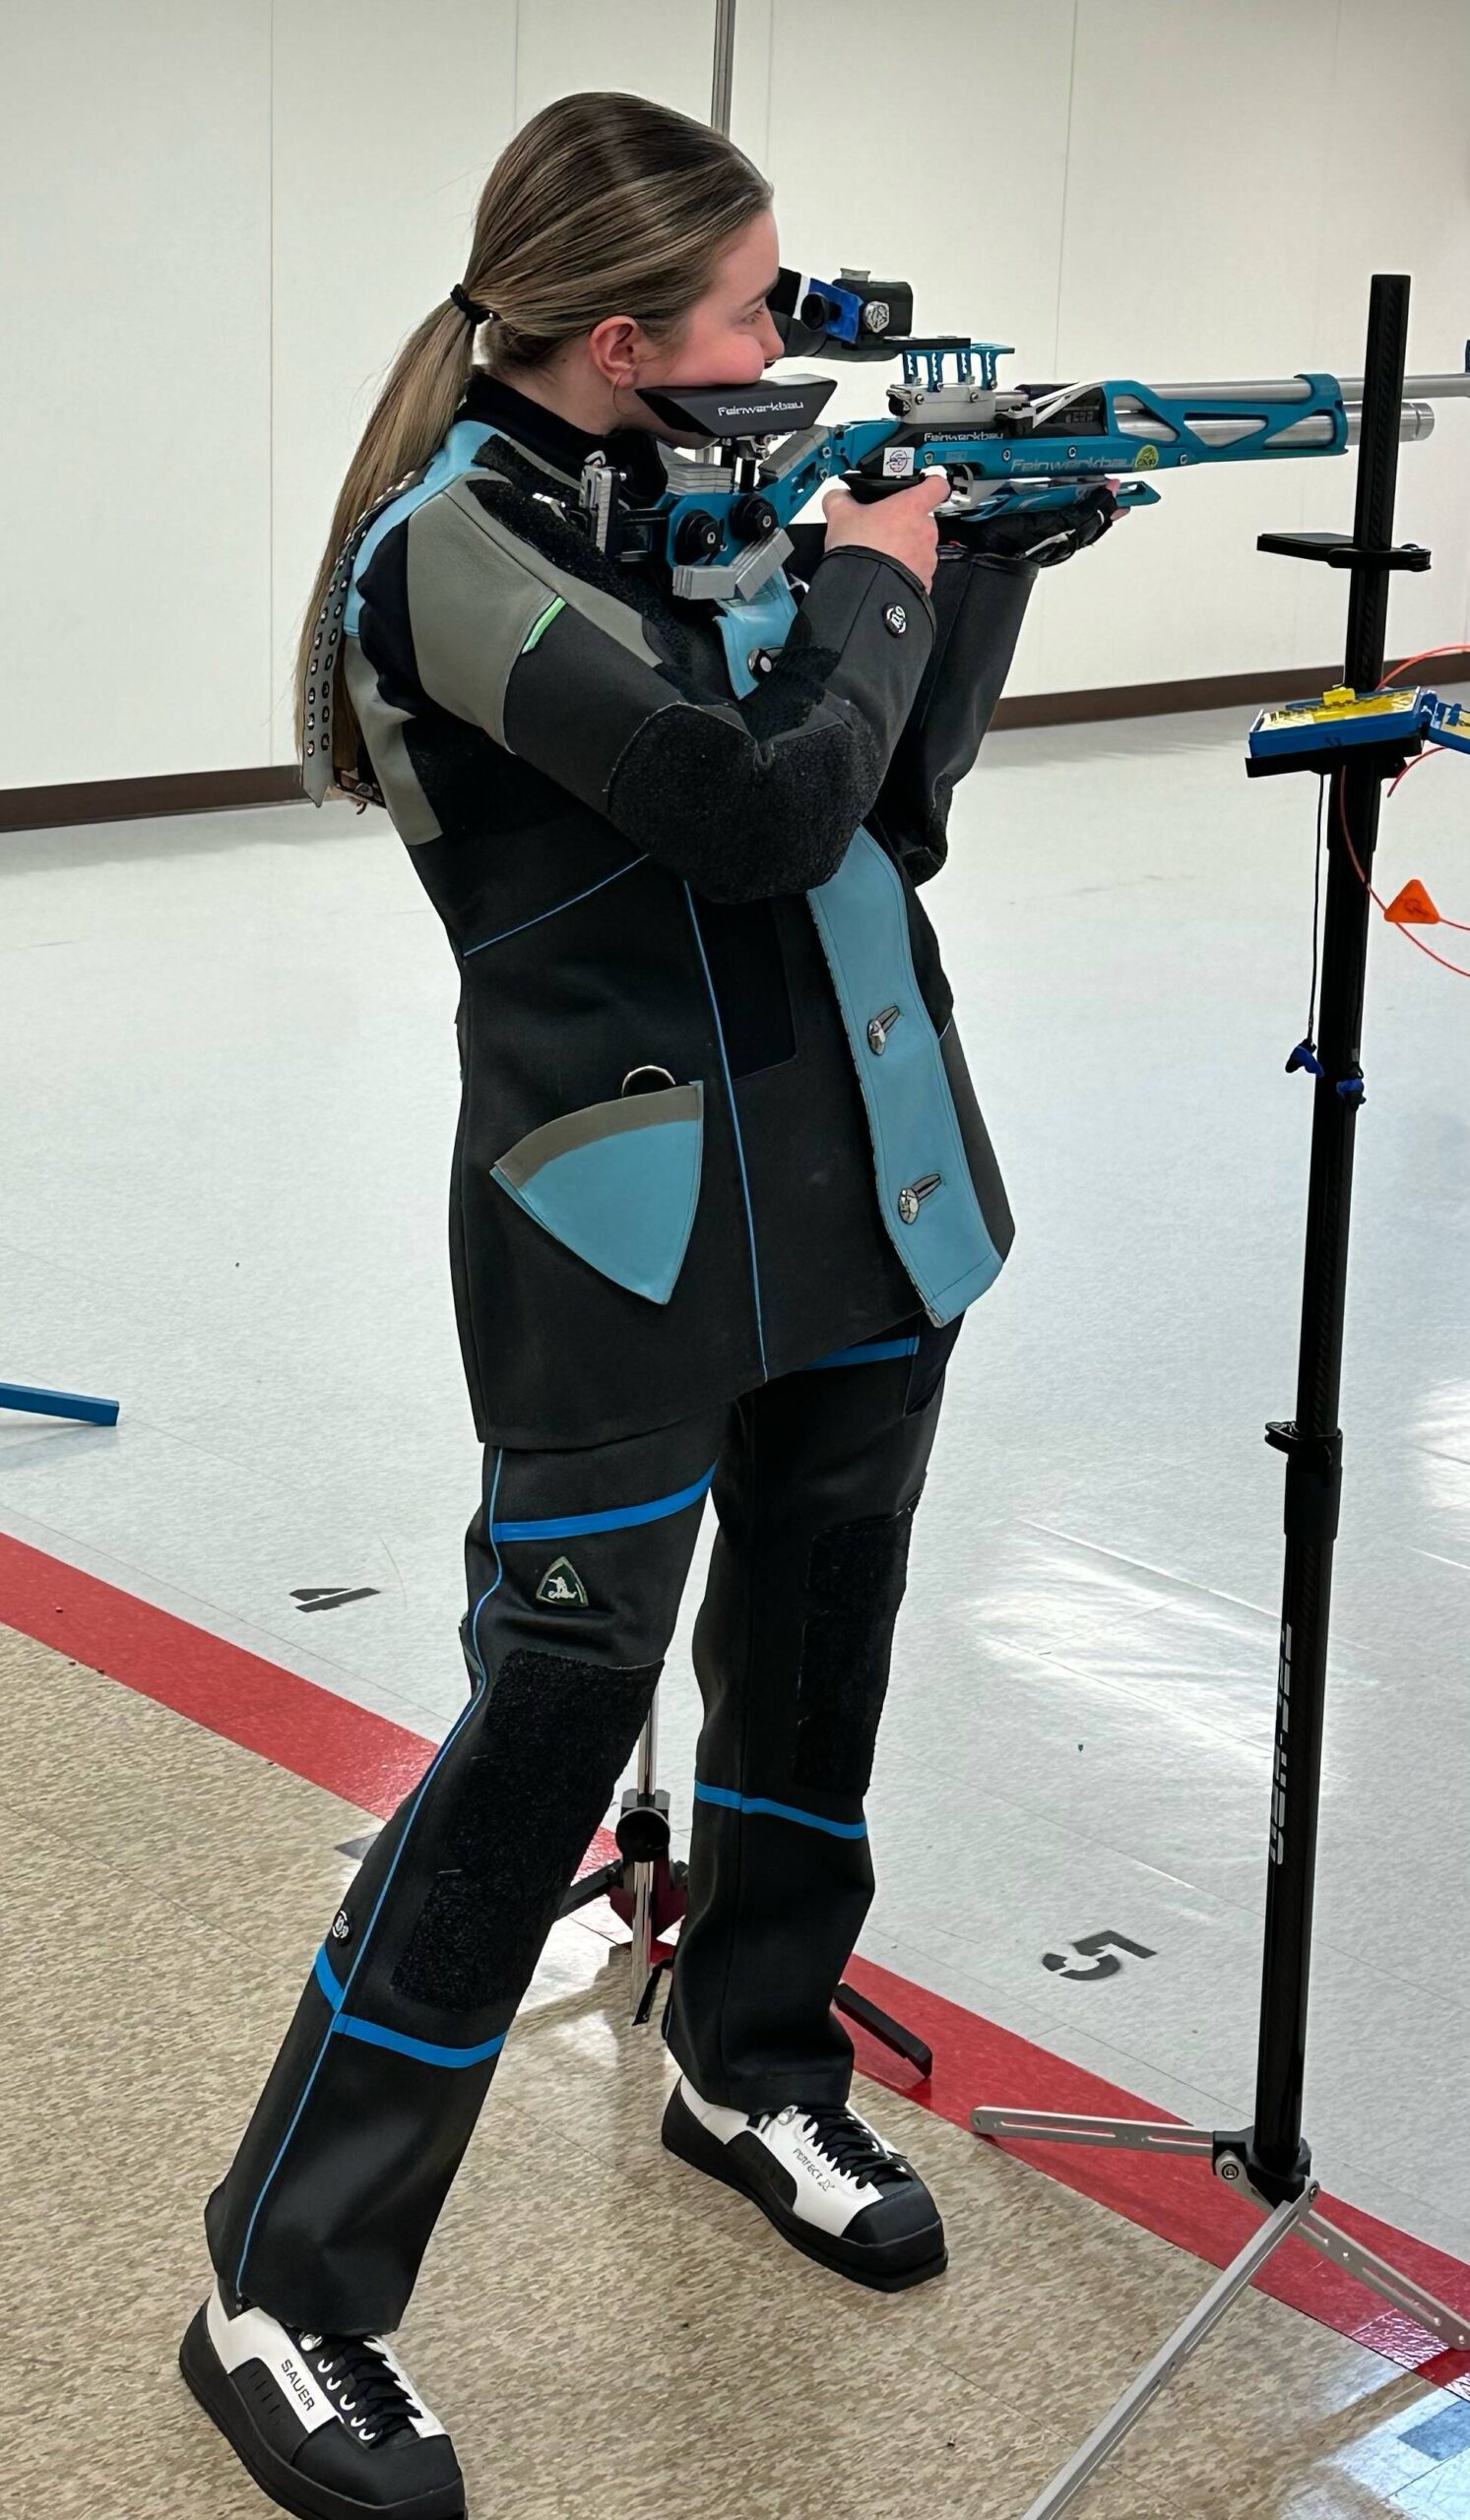 Madison Thompson qualified for the air rifle competition that takes place at the Junior Olympics in April. She is one of three Oak Harbor girls to earn a spot shooting at the Junior Olympics. (Photo courtesy of Victor Zarate)